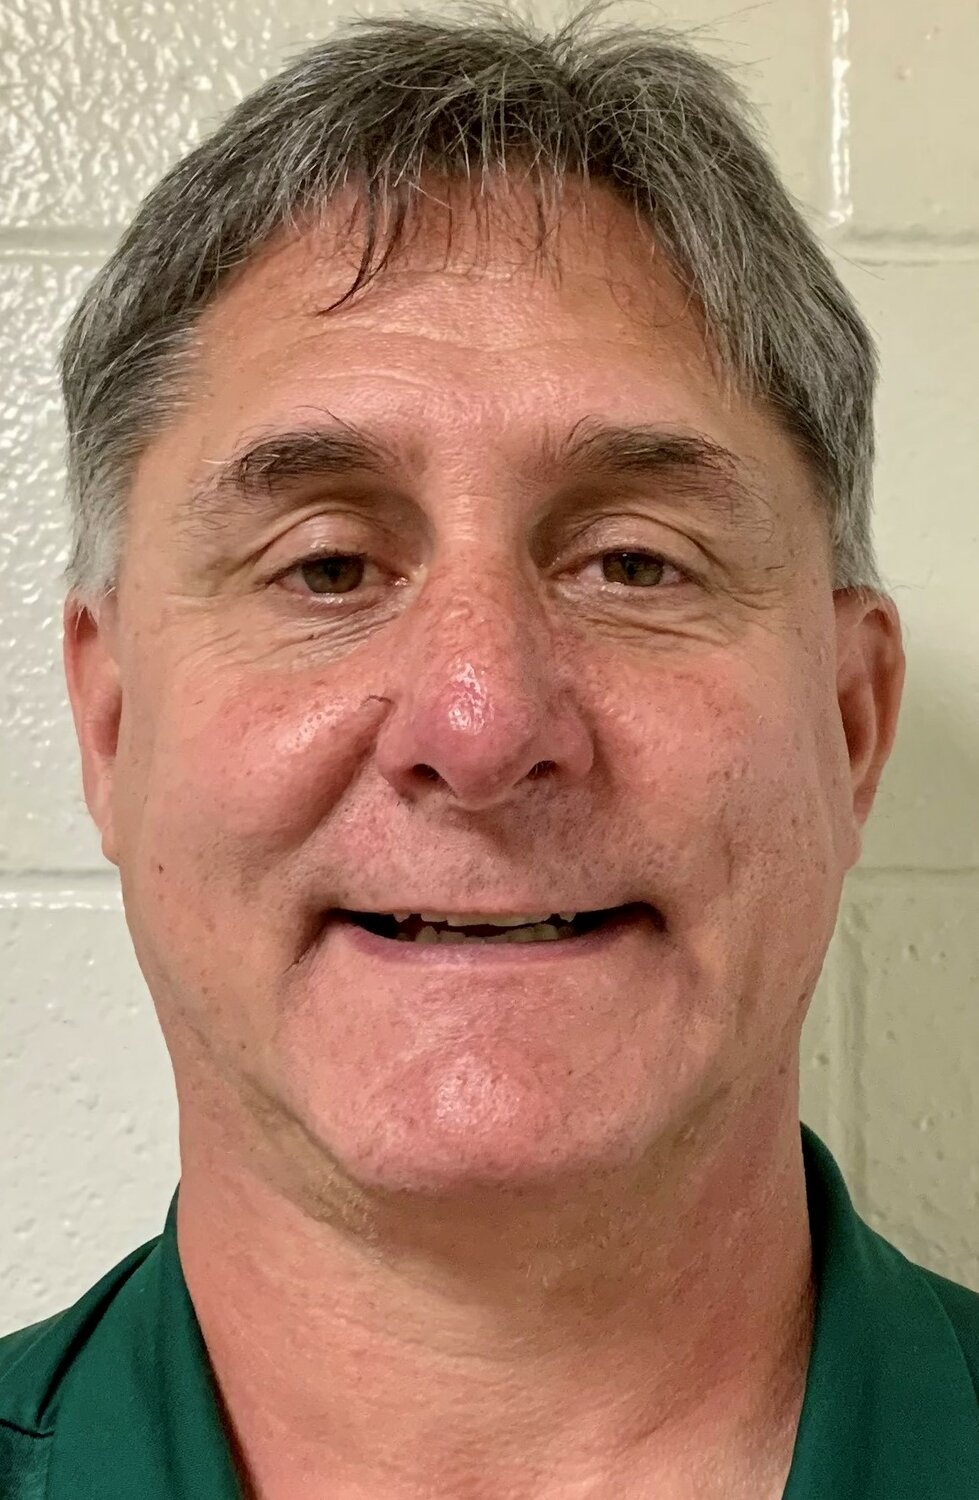 Pine Forest head coach Bill Sochovka will be on the coaching staff for the East in the East-West All-Star football game.